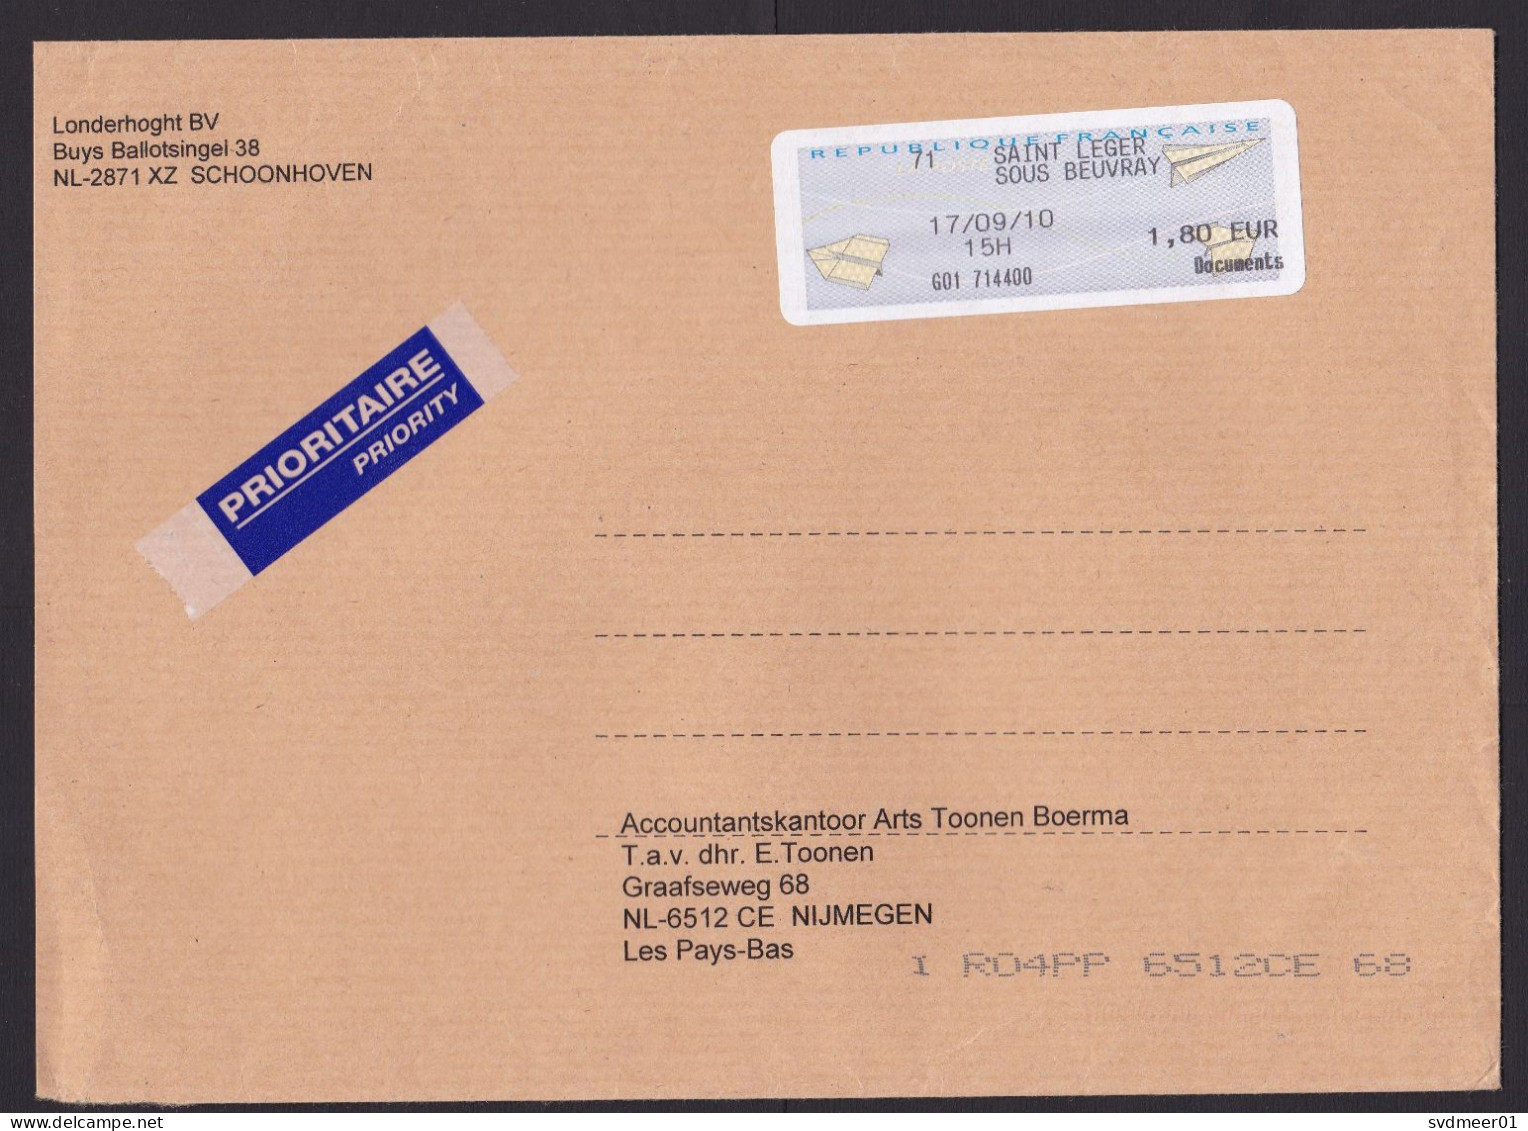 France: Priority Cover To Netherlands, 2010, ATM Machine Label, 1.80 Documents Rate, Saint Leger (traces Of Use) - Lettres & Documents